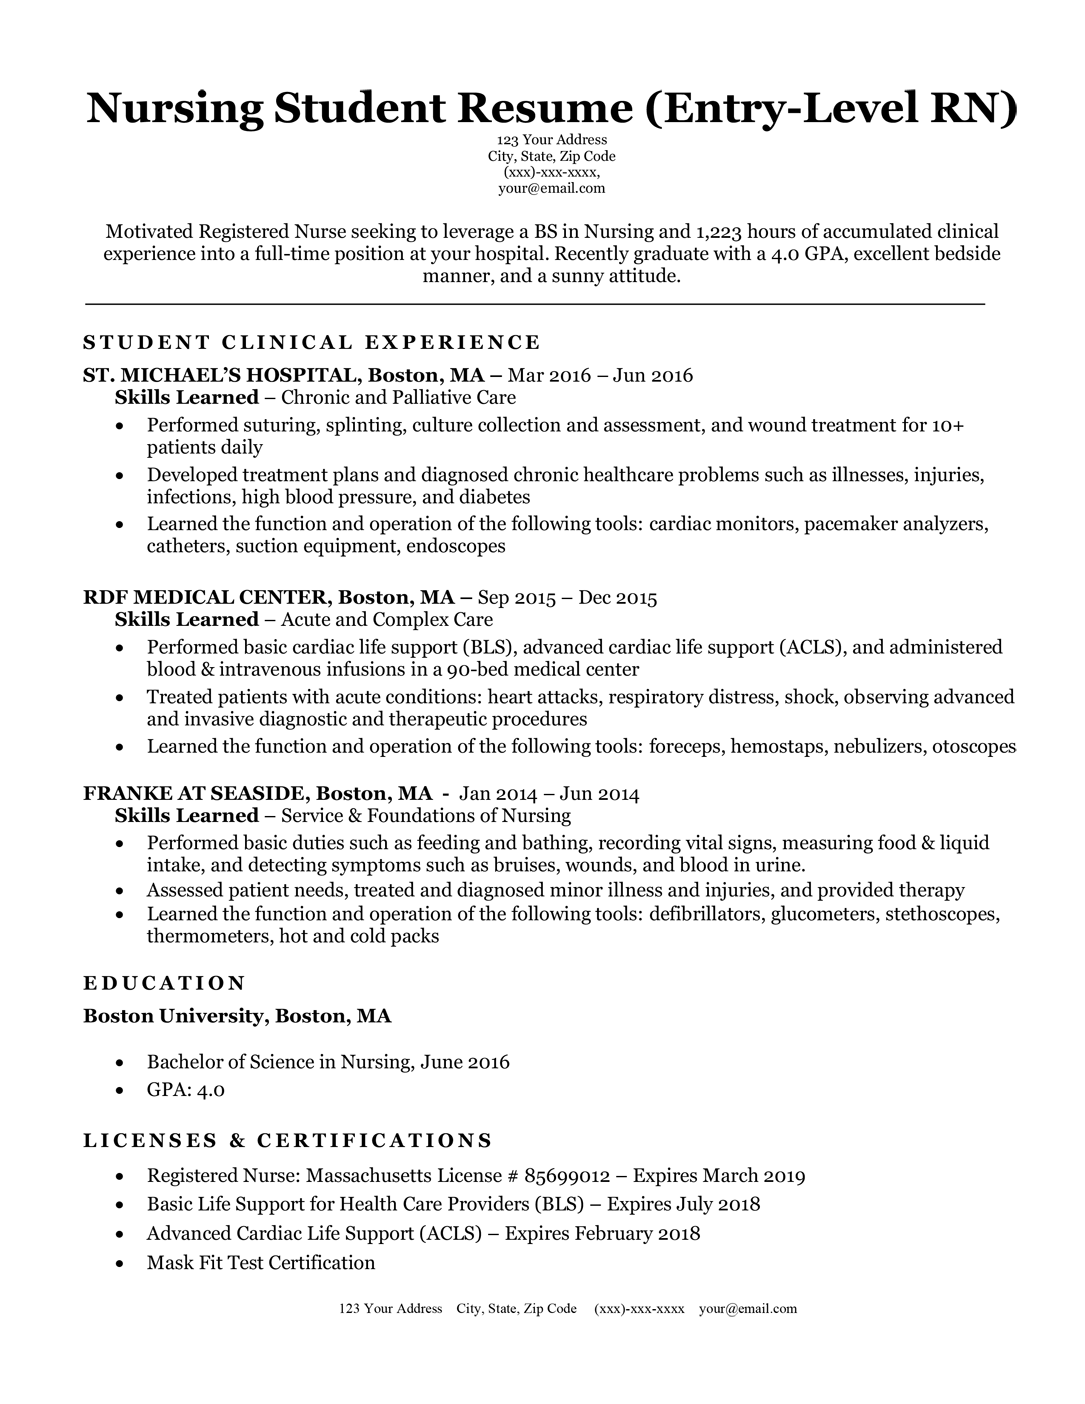 New Grad Rn Resume Templates TEMPLATES EXAMPLE TEMPLATES EXAMPLE